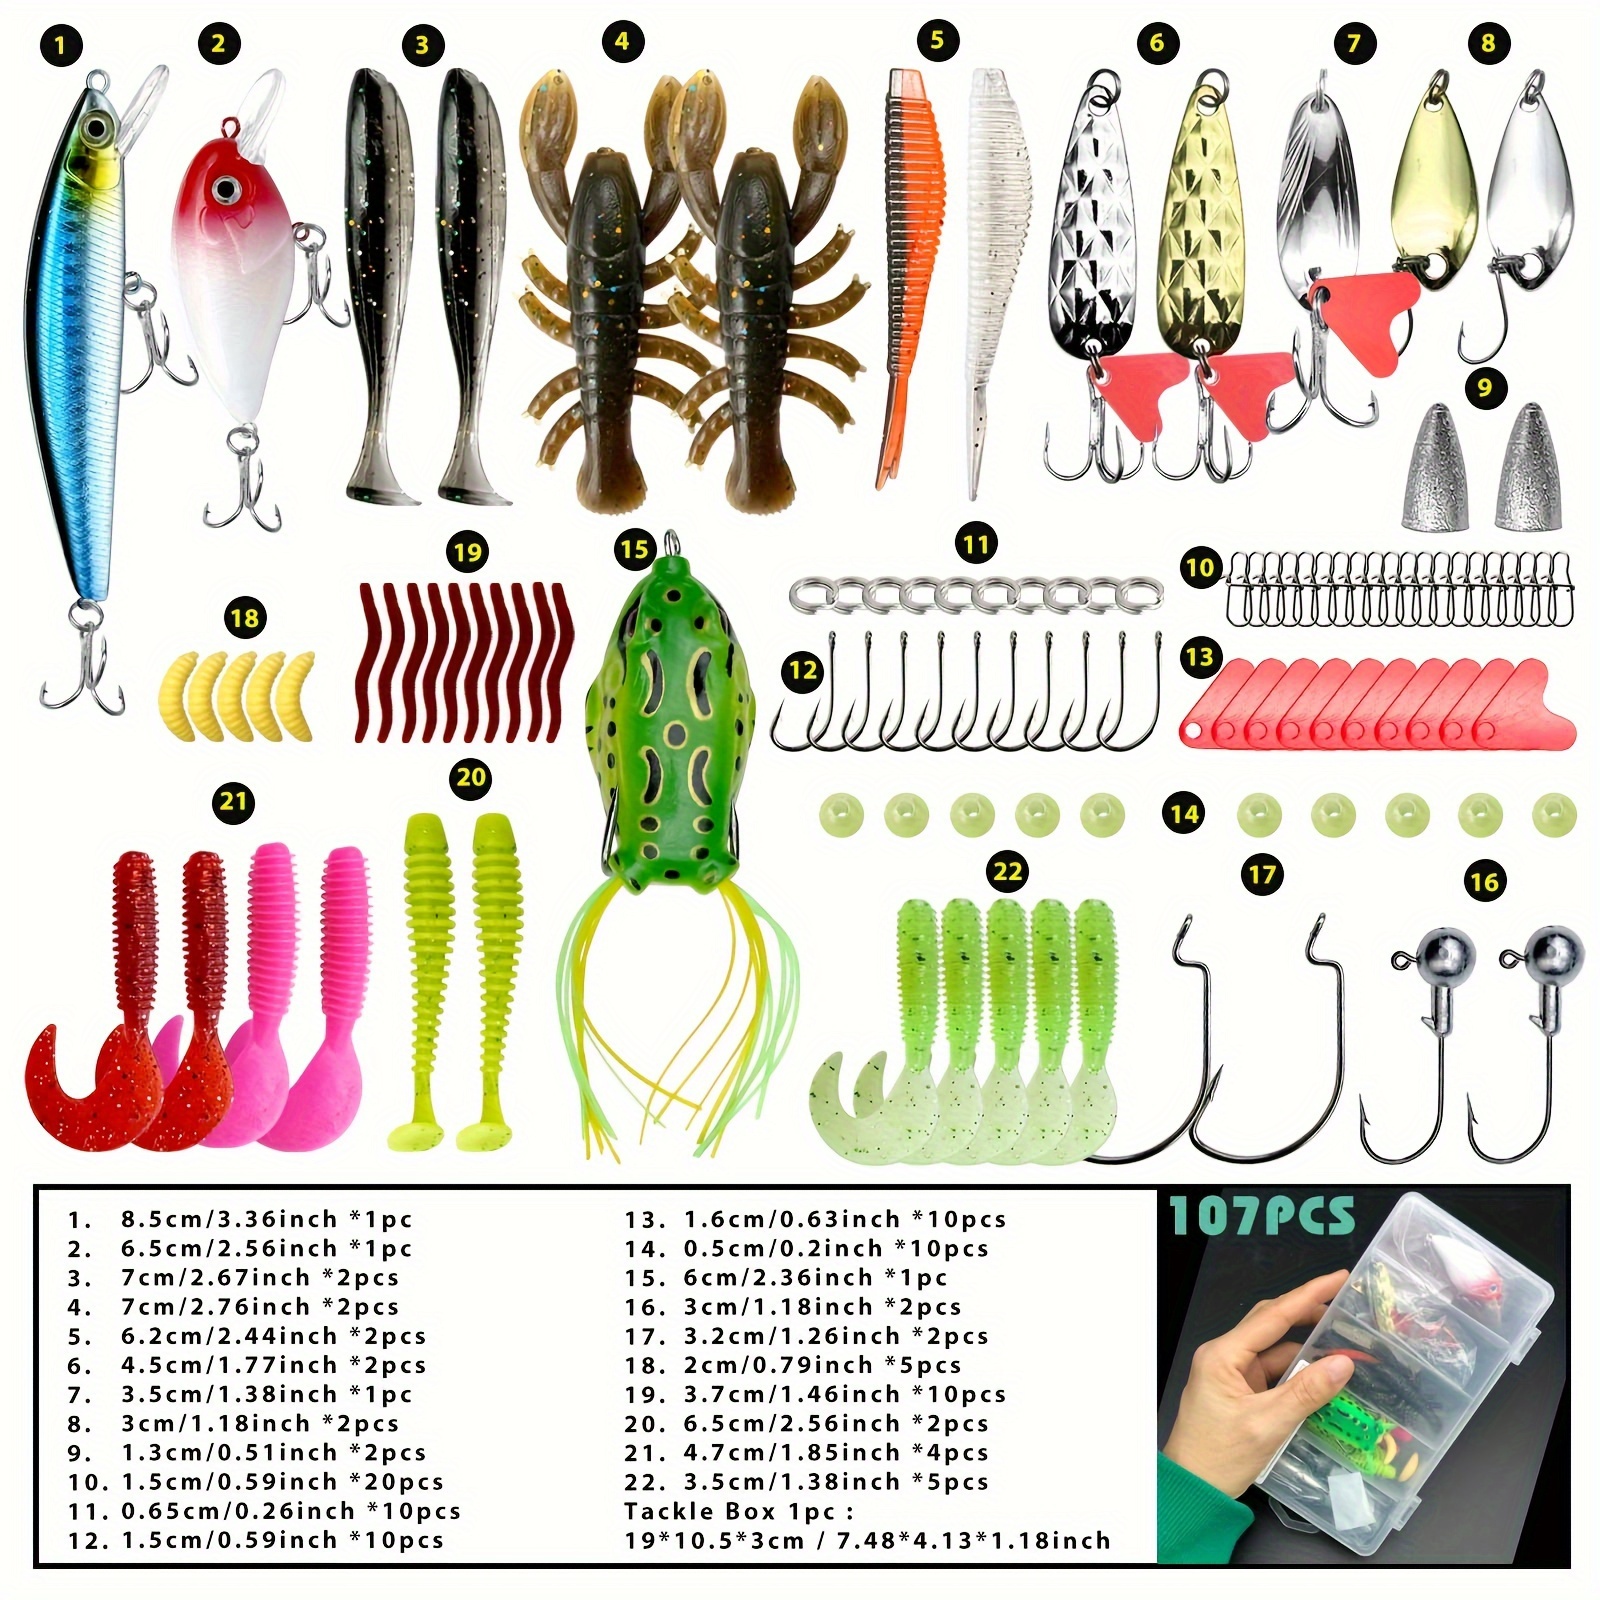 TCMBY 327PCS Fishing Lures Tackle Bait Kit Set for Freshwater Fishing  Tackle Box with Tackle Included Fishing Gear, Crankbait, Soft Worm,  Spinner, Spoon, Topwater, Hook, Jigs for Bass Trout., Tackle Boxes 